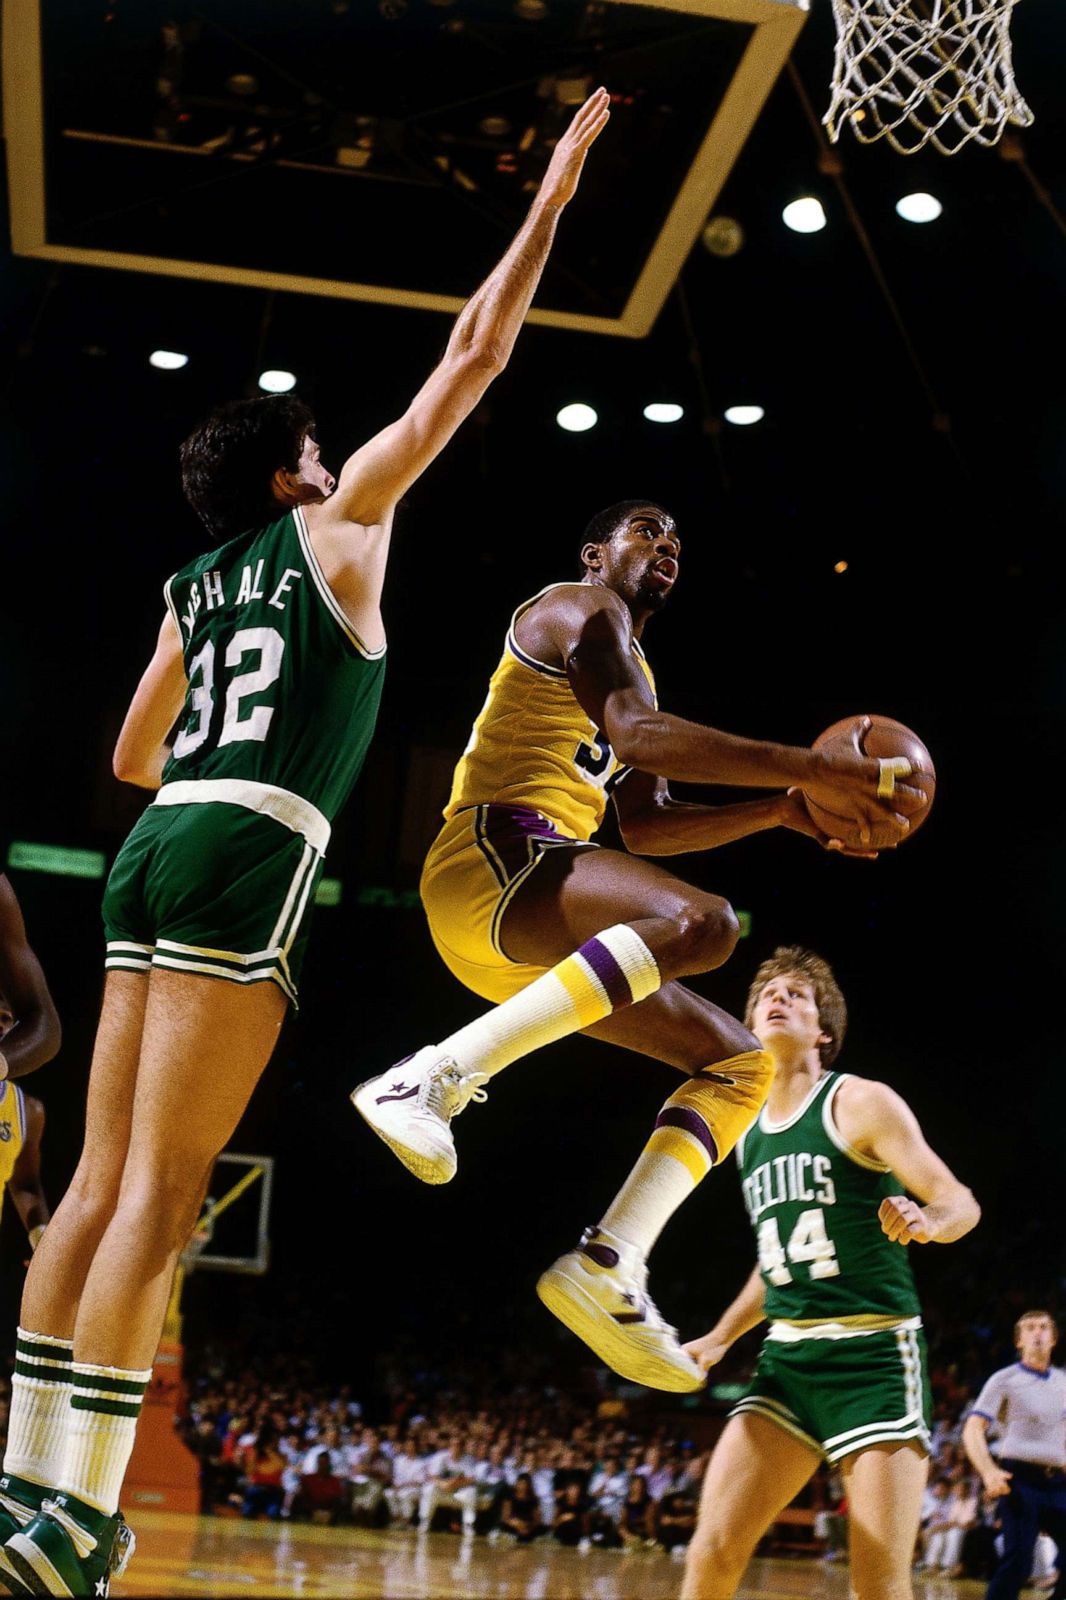 Magic Johnson Was Once Left Stunned by “The Greatest Shot Ever